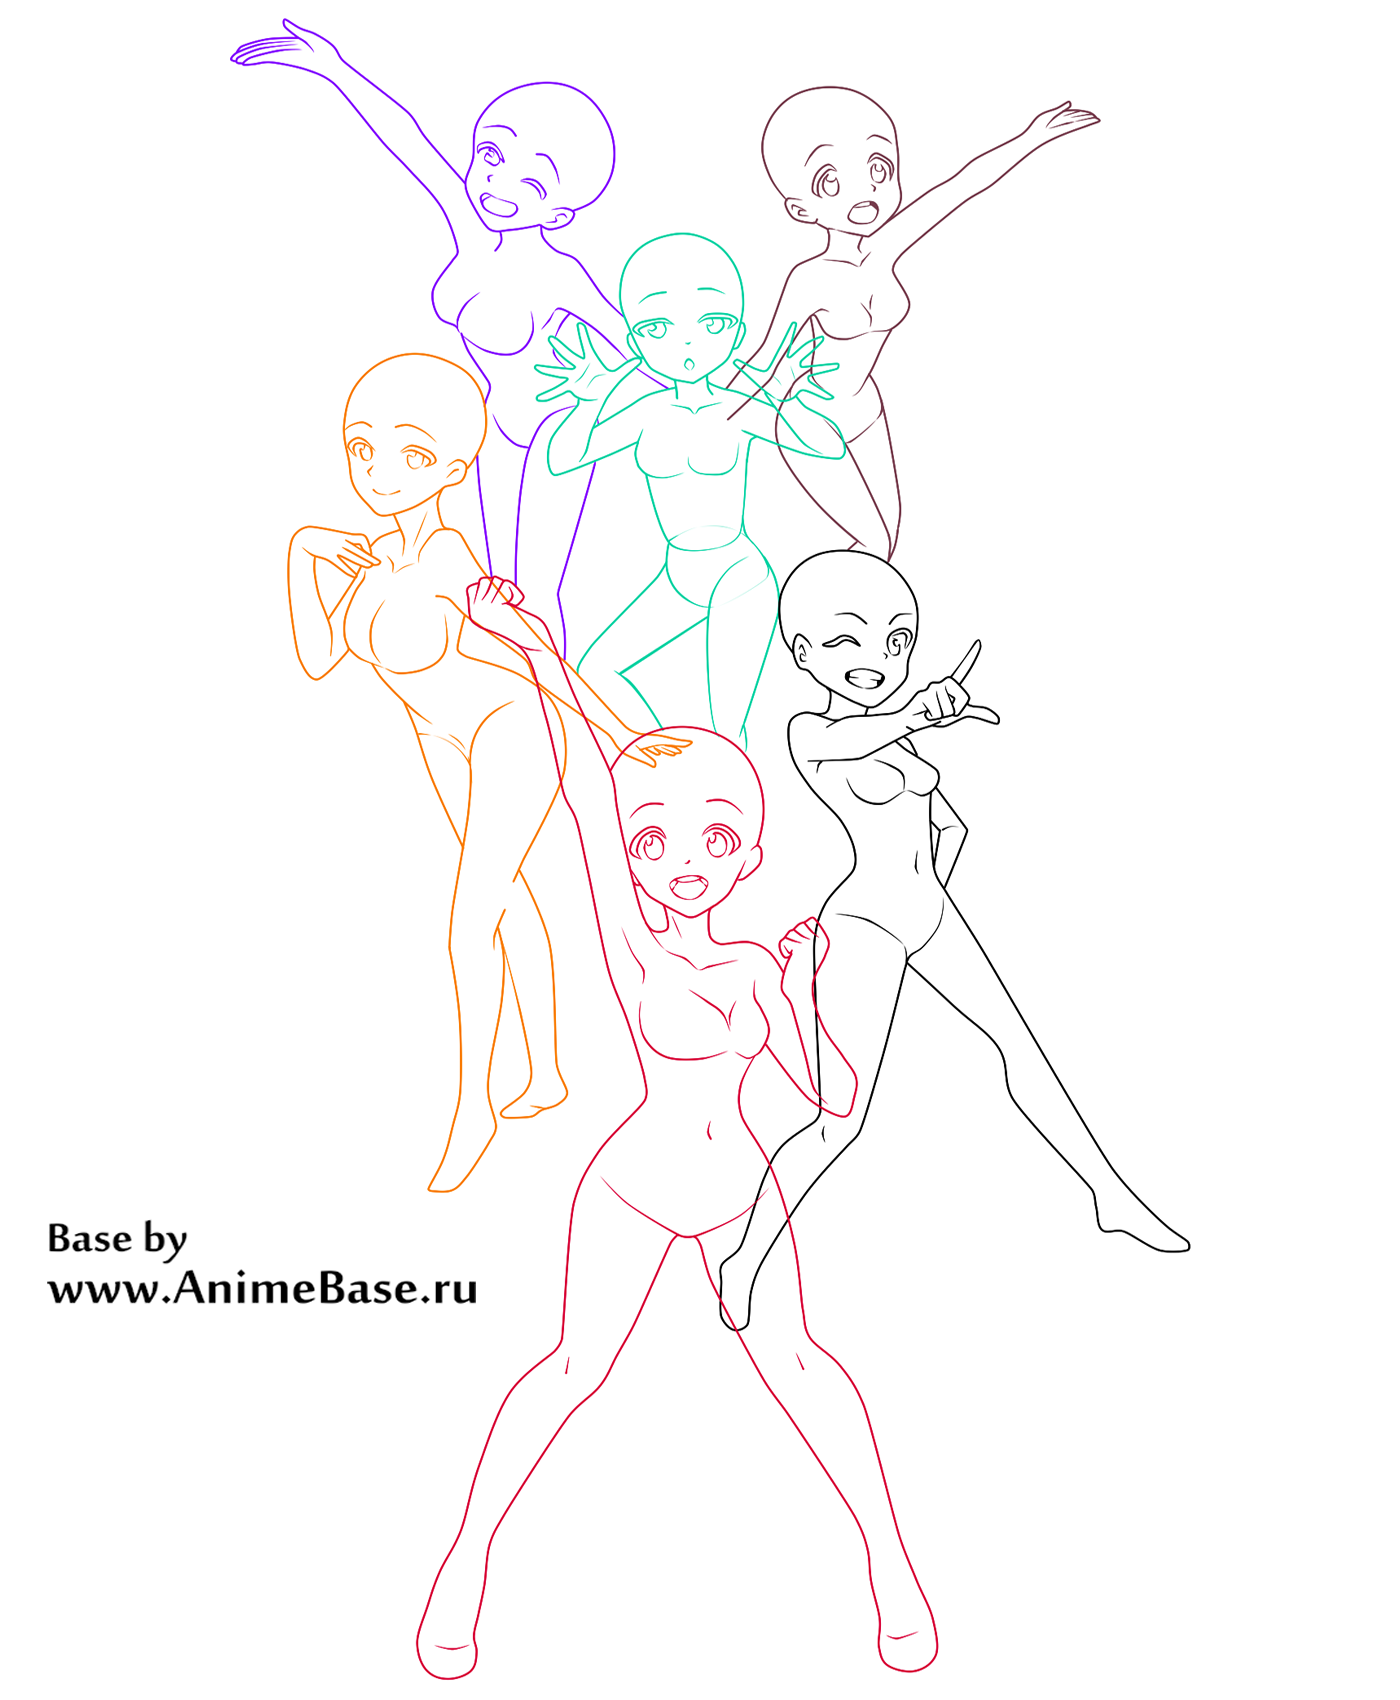 Group, couple bases - Anime Bases .INFO Boy and Girl sketch reference full  free